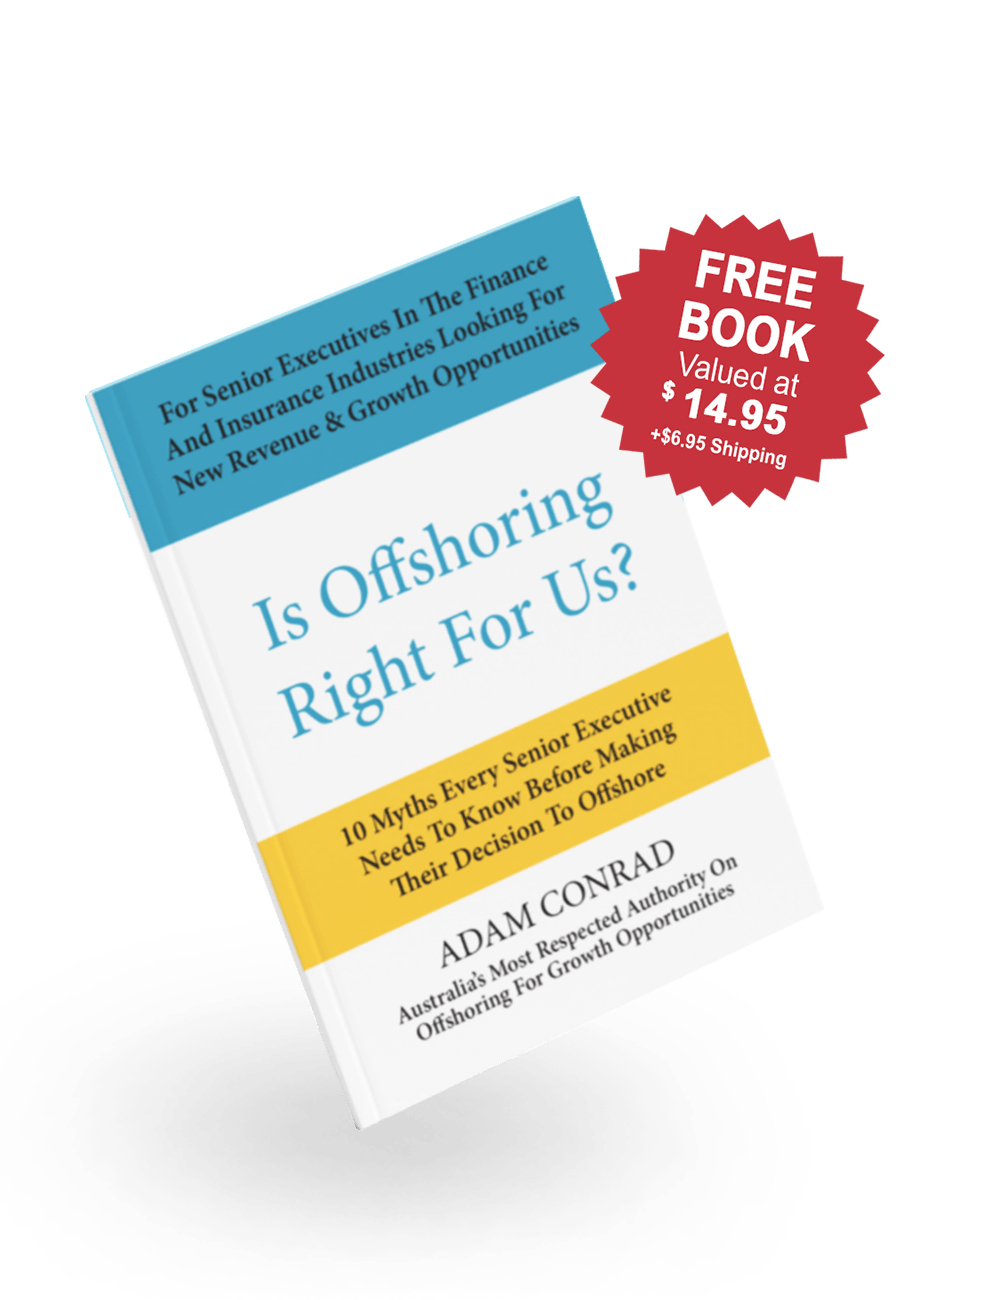 Ultimate Guide: Is Offshoring Right for your Business?